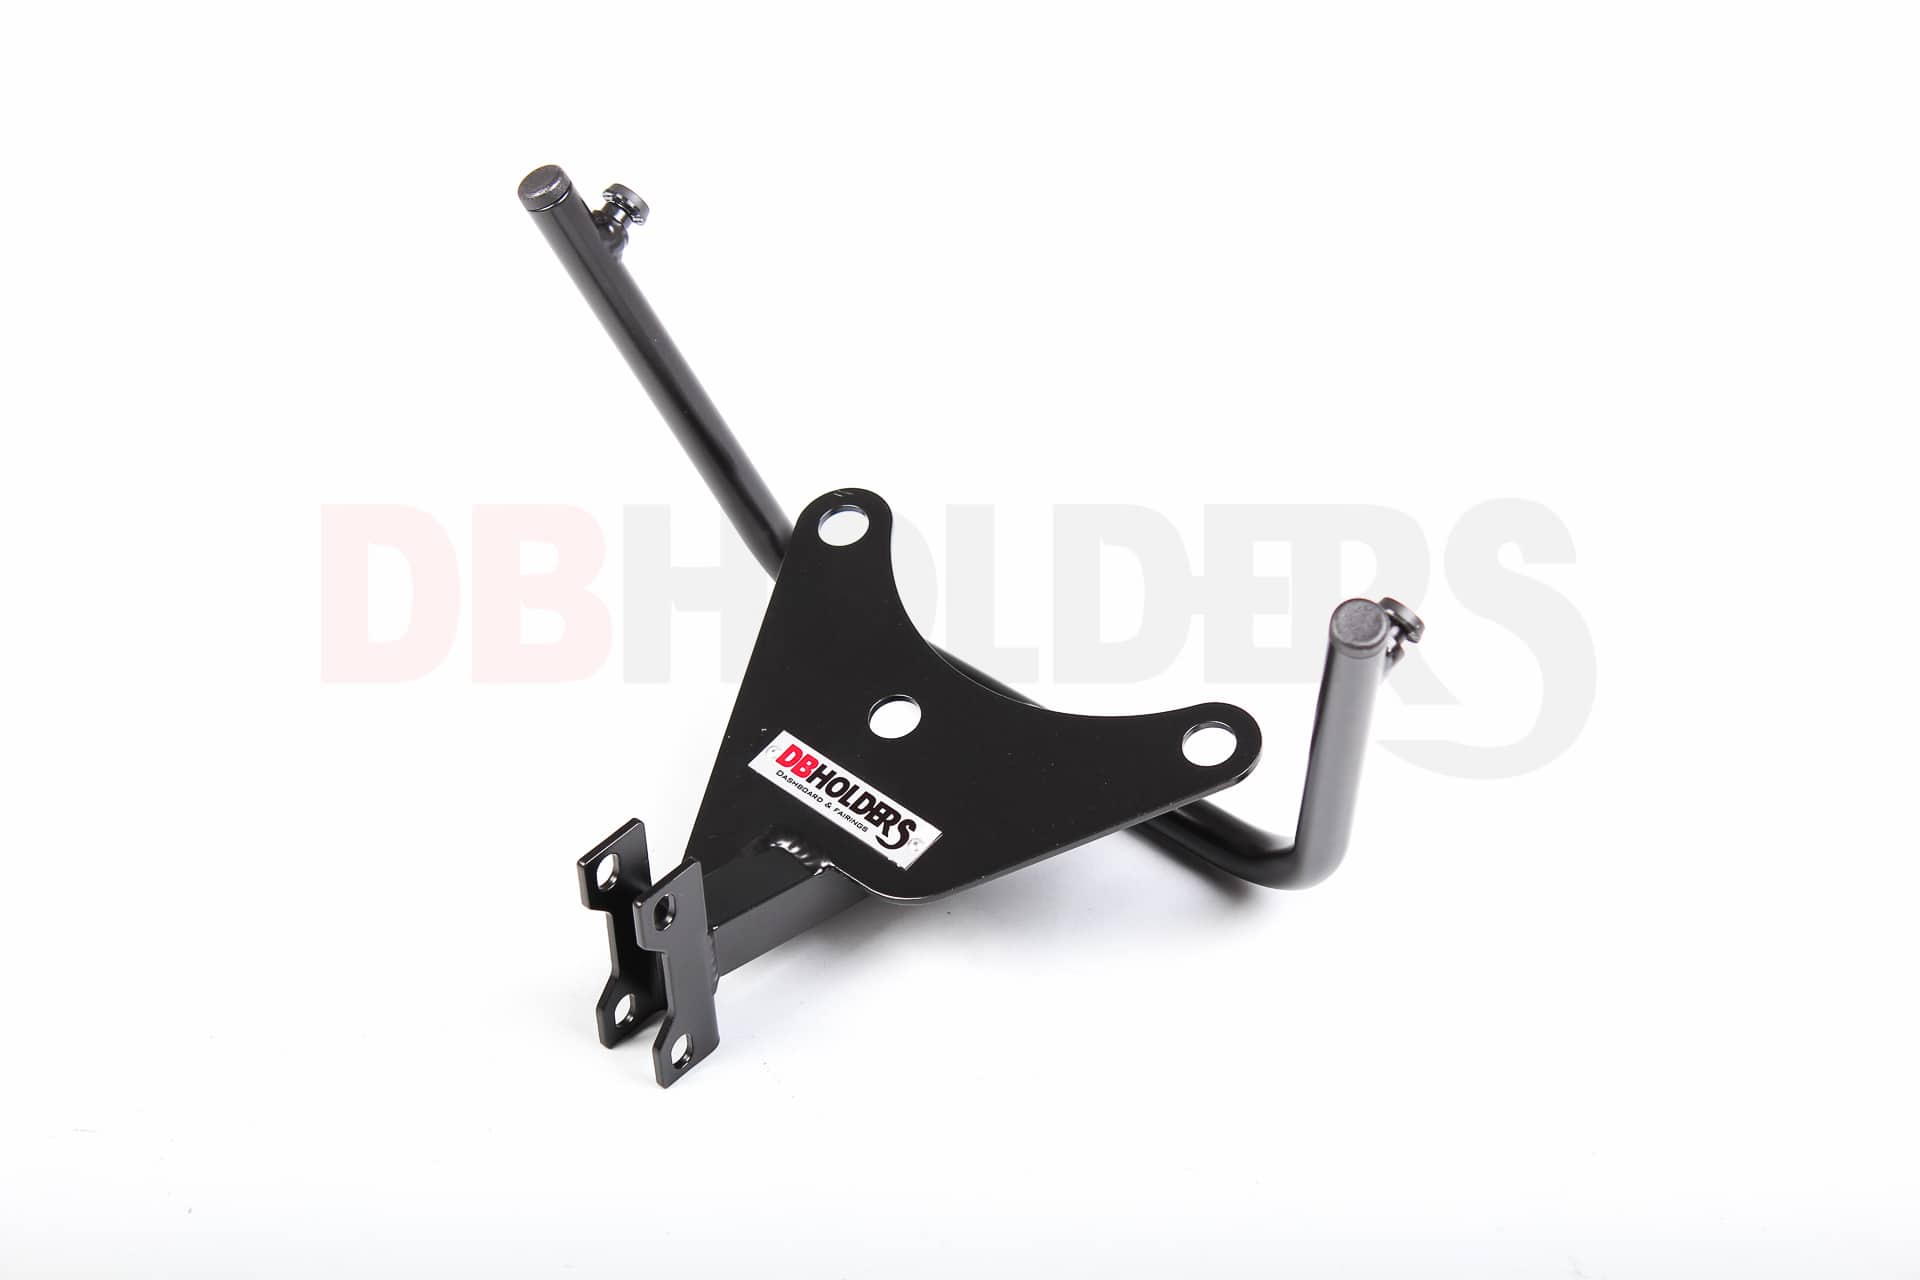 XKMT-Black Upper Stay Cowl Bracket Fairing Bracket Compatible With YZF R1 2007-2008 B00YWCIGCG Replaces part number 4C8-28356-00-00 